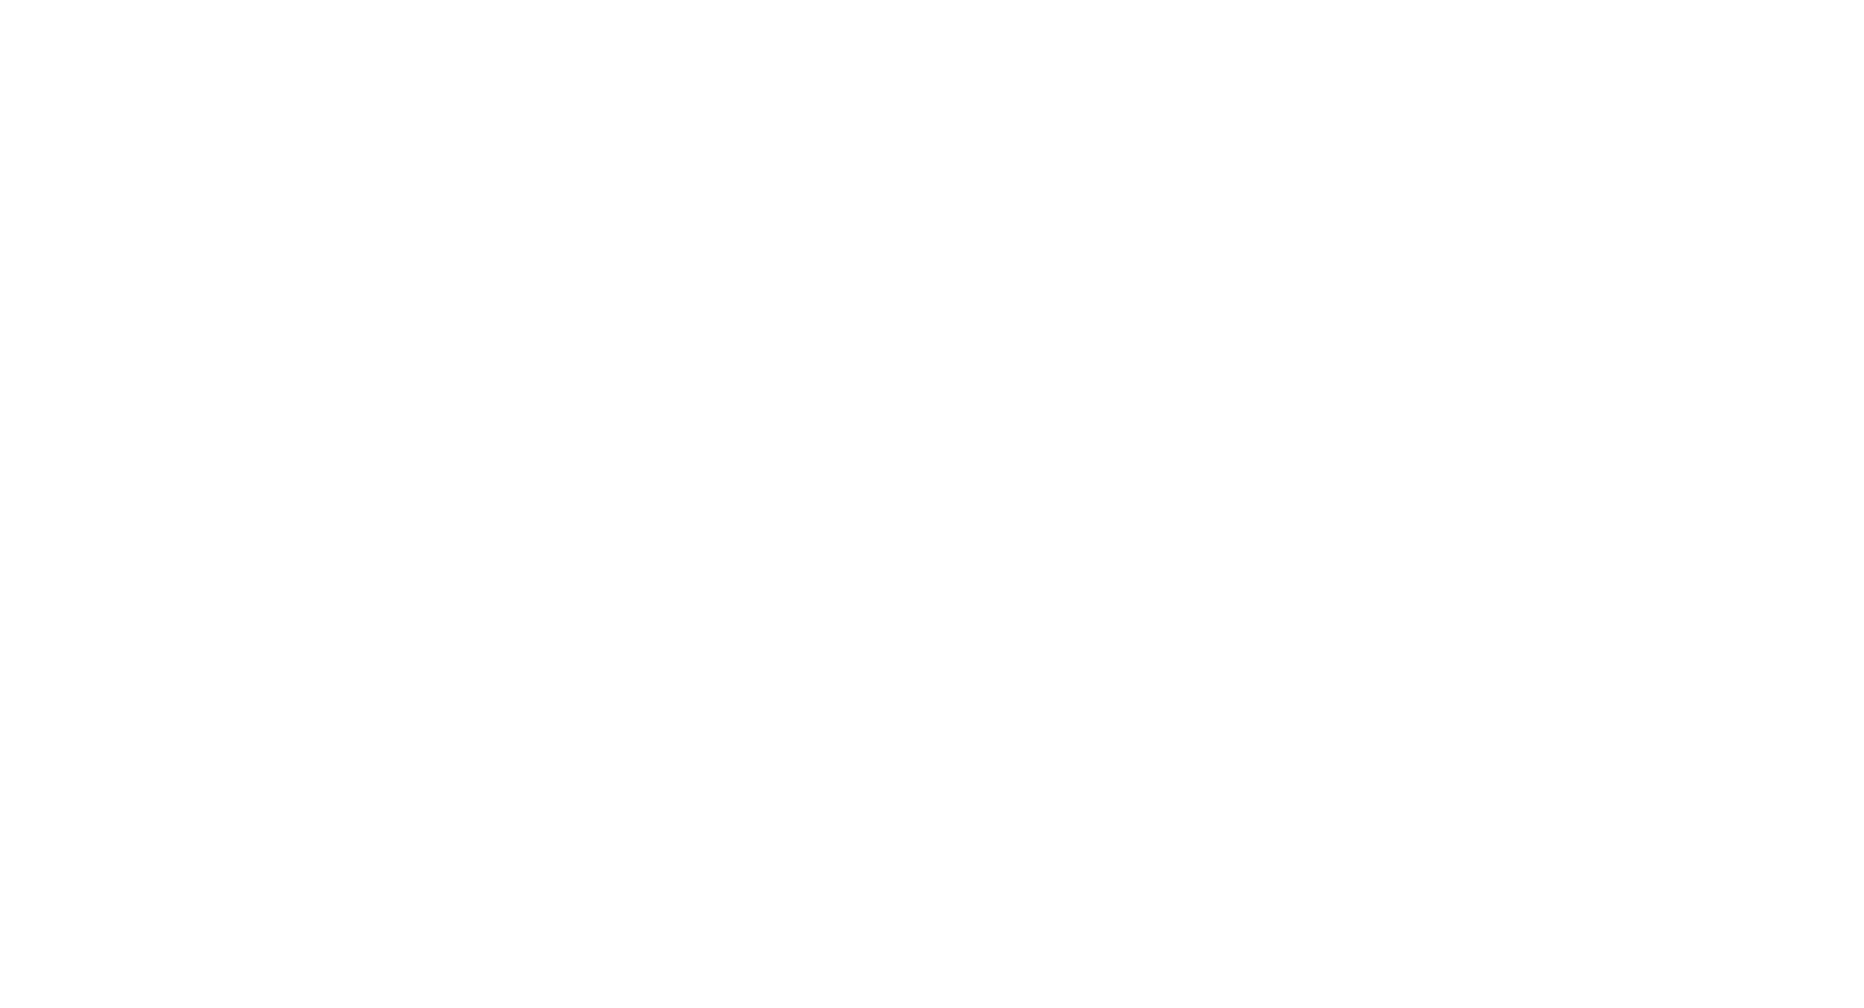 The North End logo